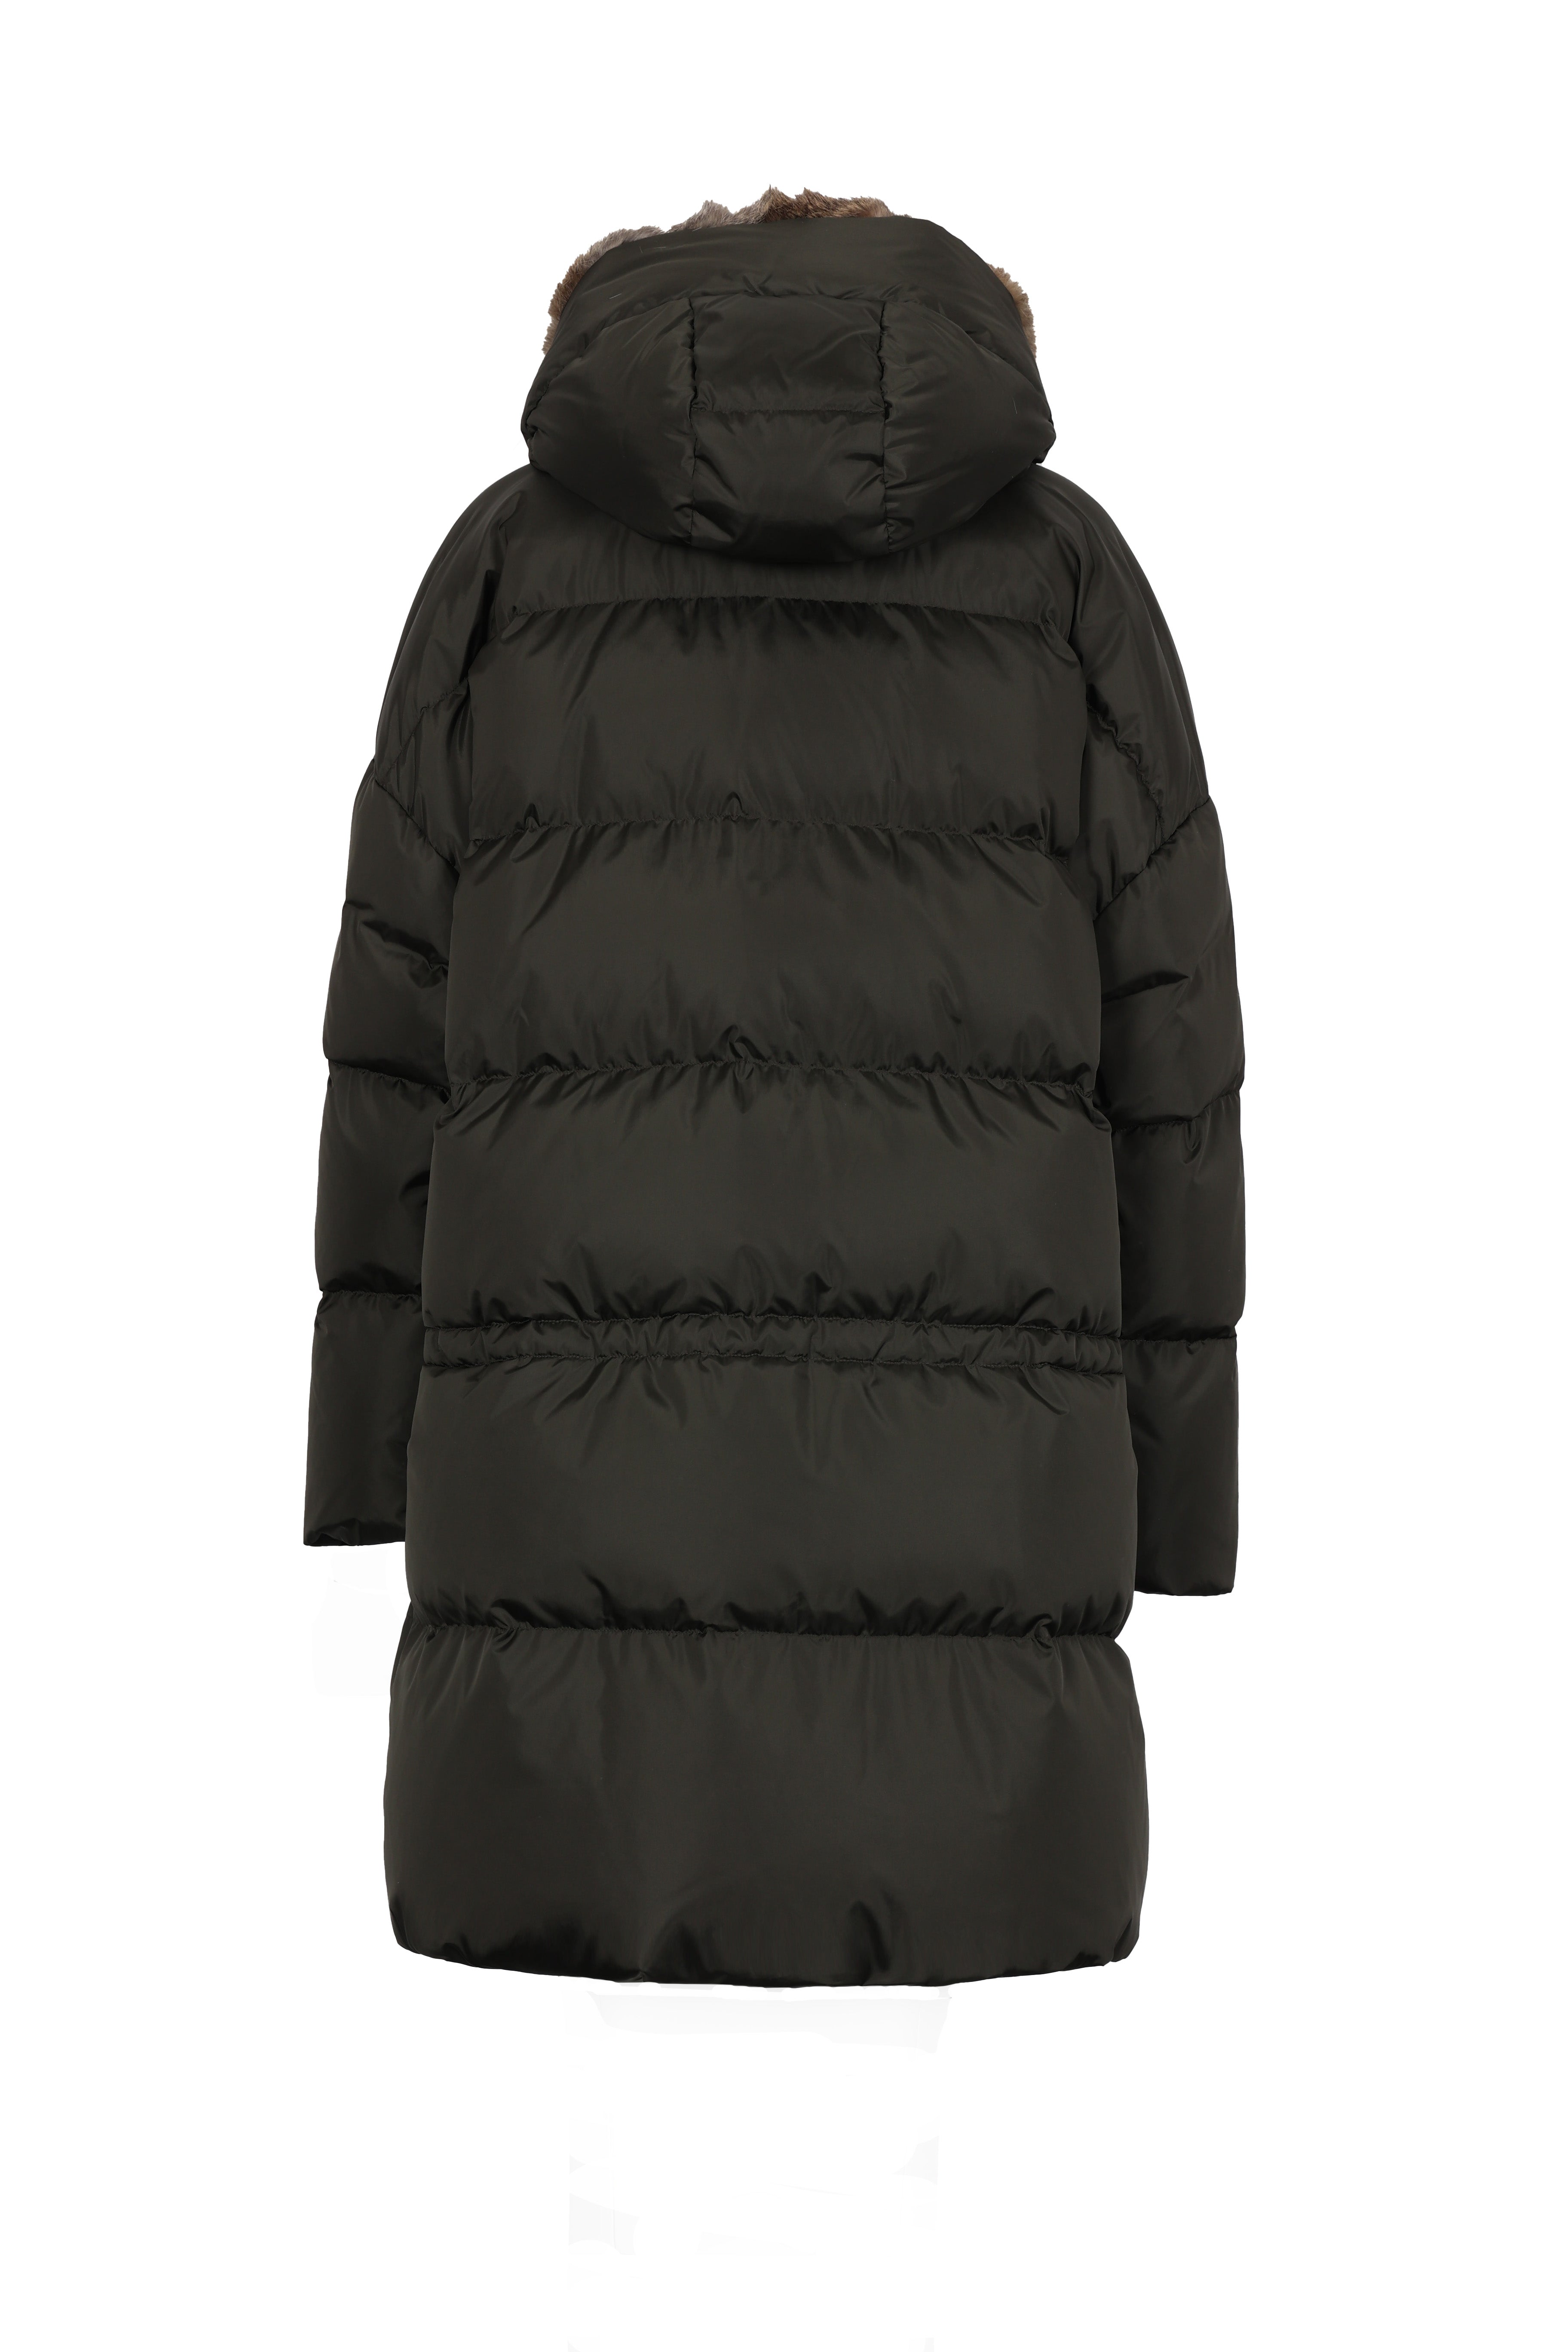 oversized Lempelius down parka in the color dark green